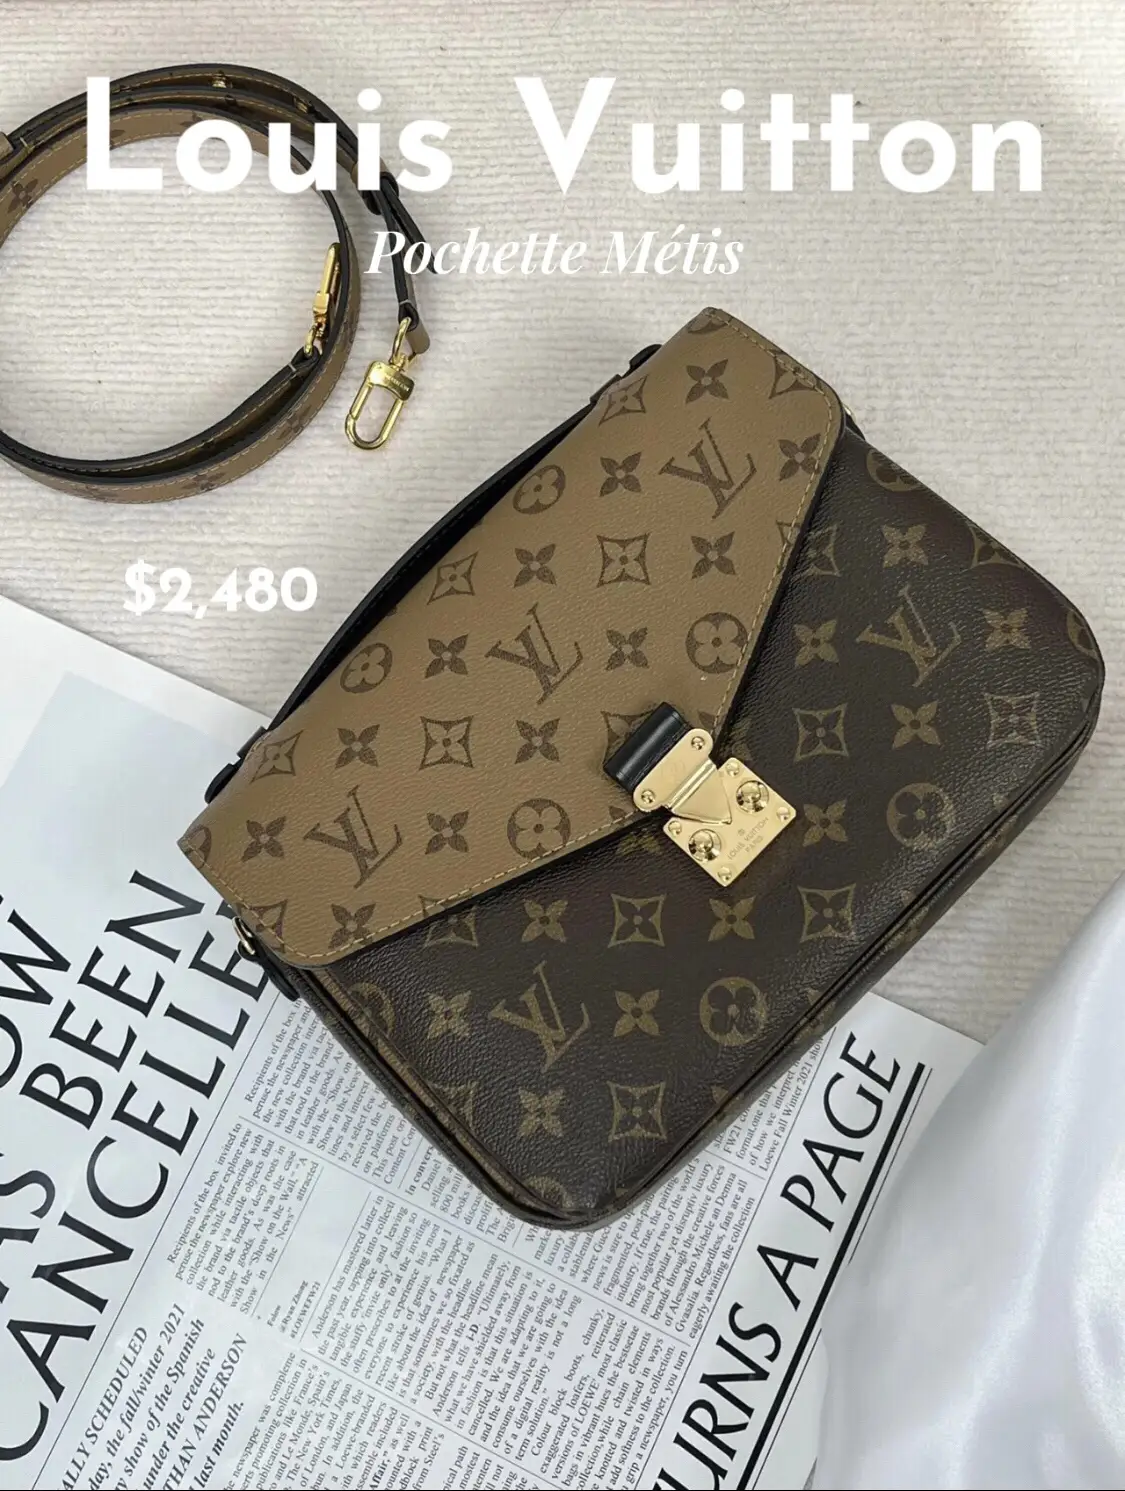 The most usable Louis Vuitton handbag, Gallery posted by Avianna Astrid